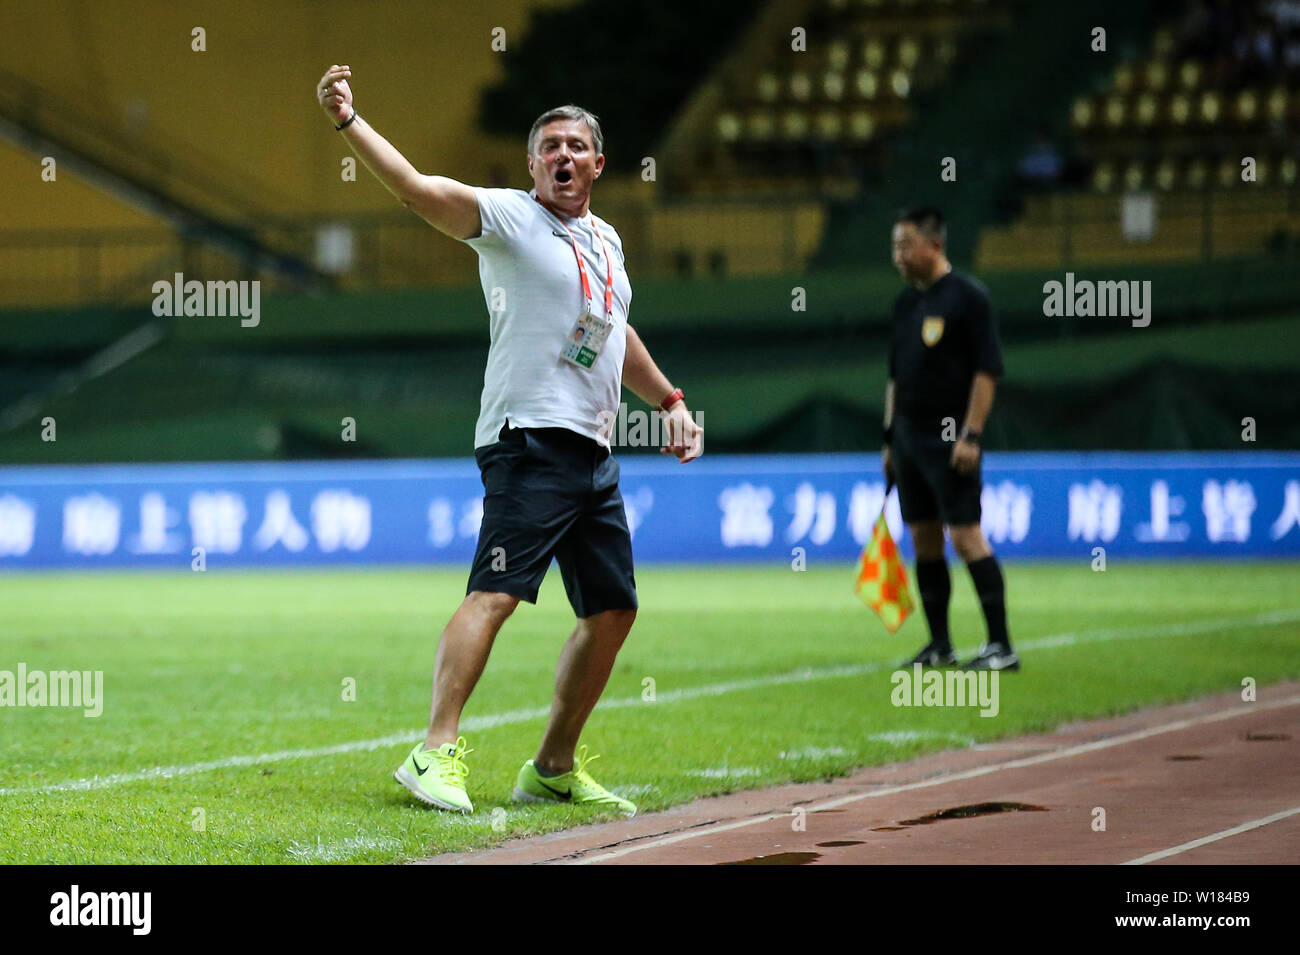 Head coach Dragan Stojkovic of Guangzhou R&F celebrates as he watches his players scoring against Henan Jianye in their 15th round match during the 2019 Chinese Football Association Super League (CSL) in Guangzhou city, south China's Guangdong province, 29 June 2019. Guangzhou R&F defeated Henan Jianye 2-0. Stock Photo